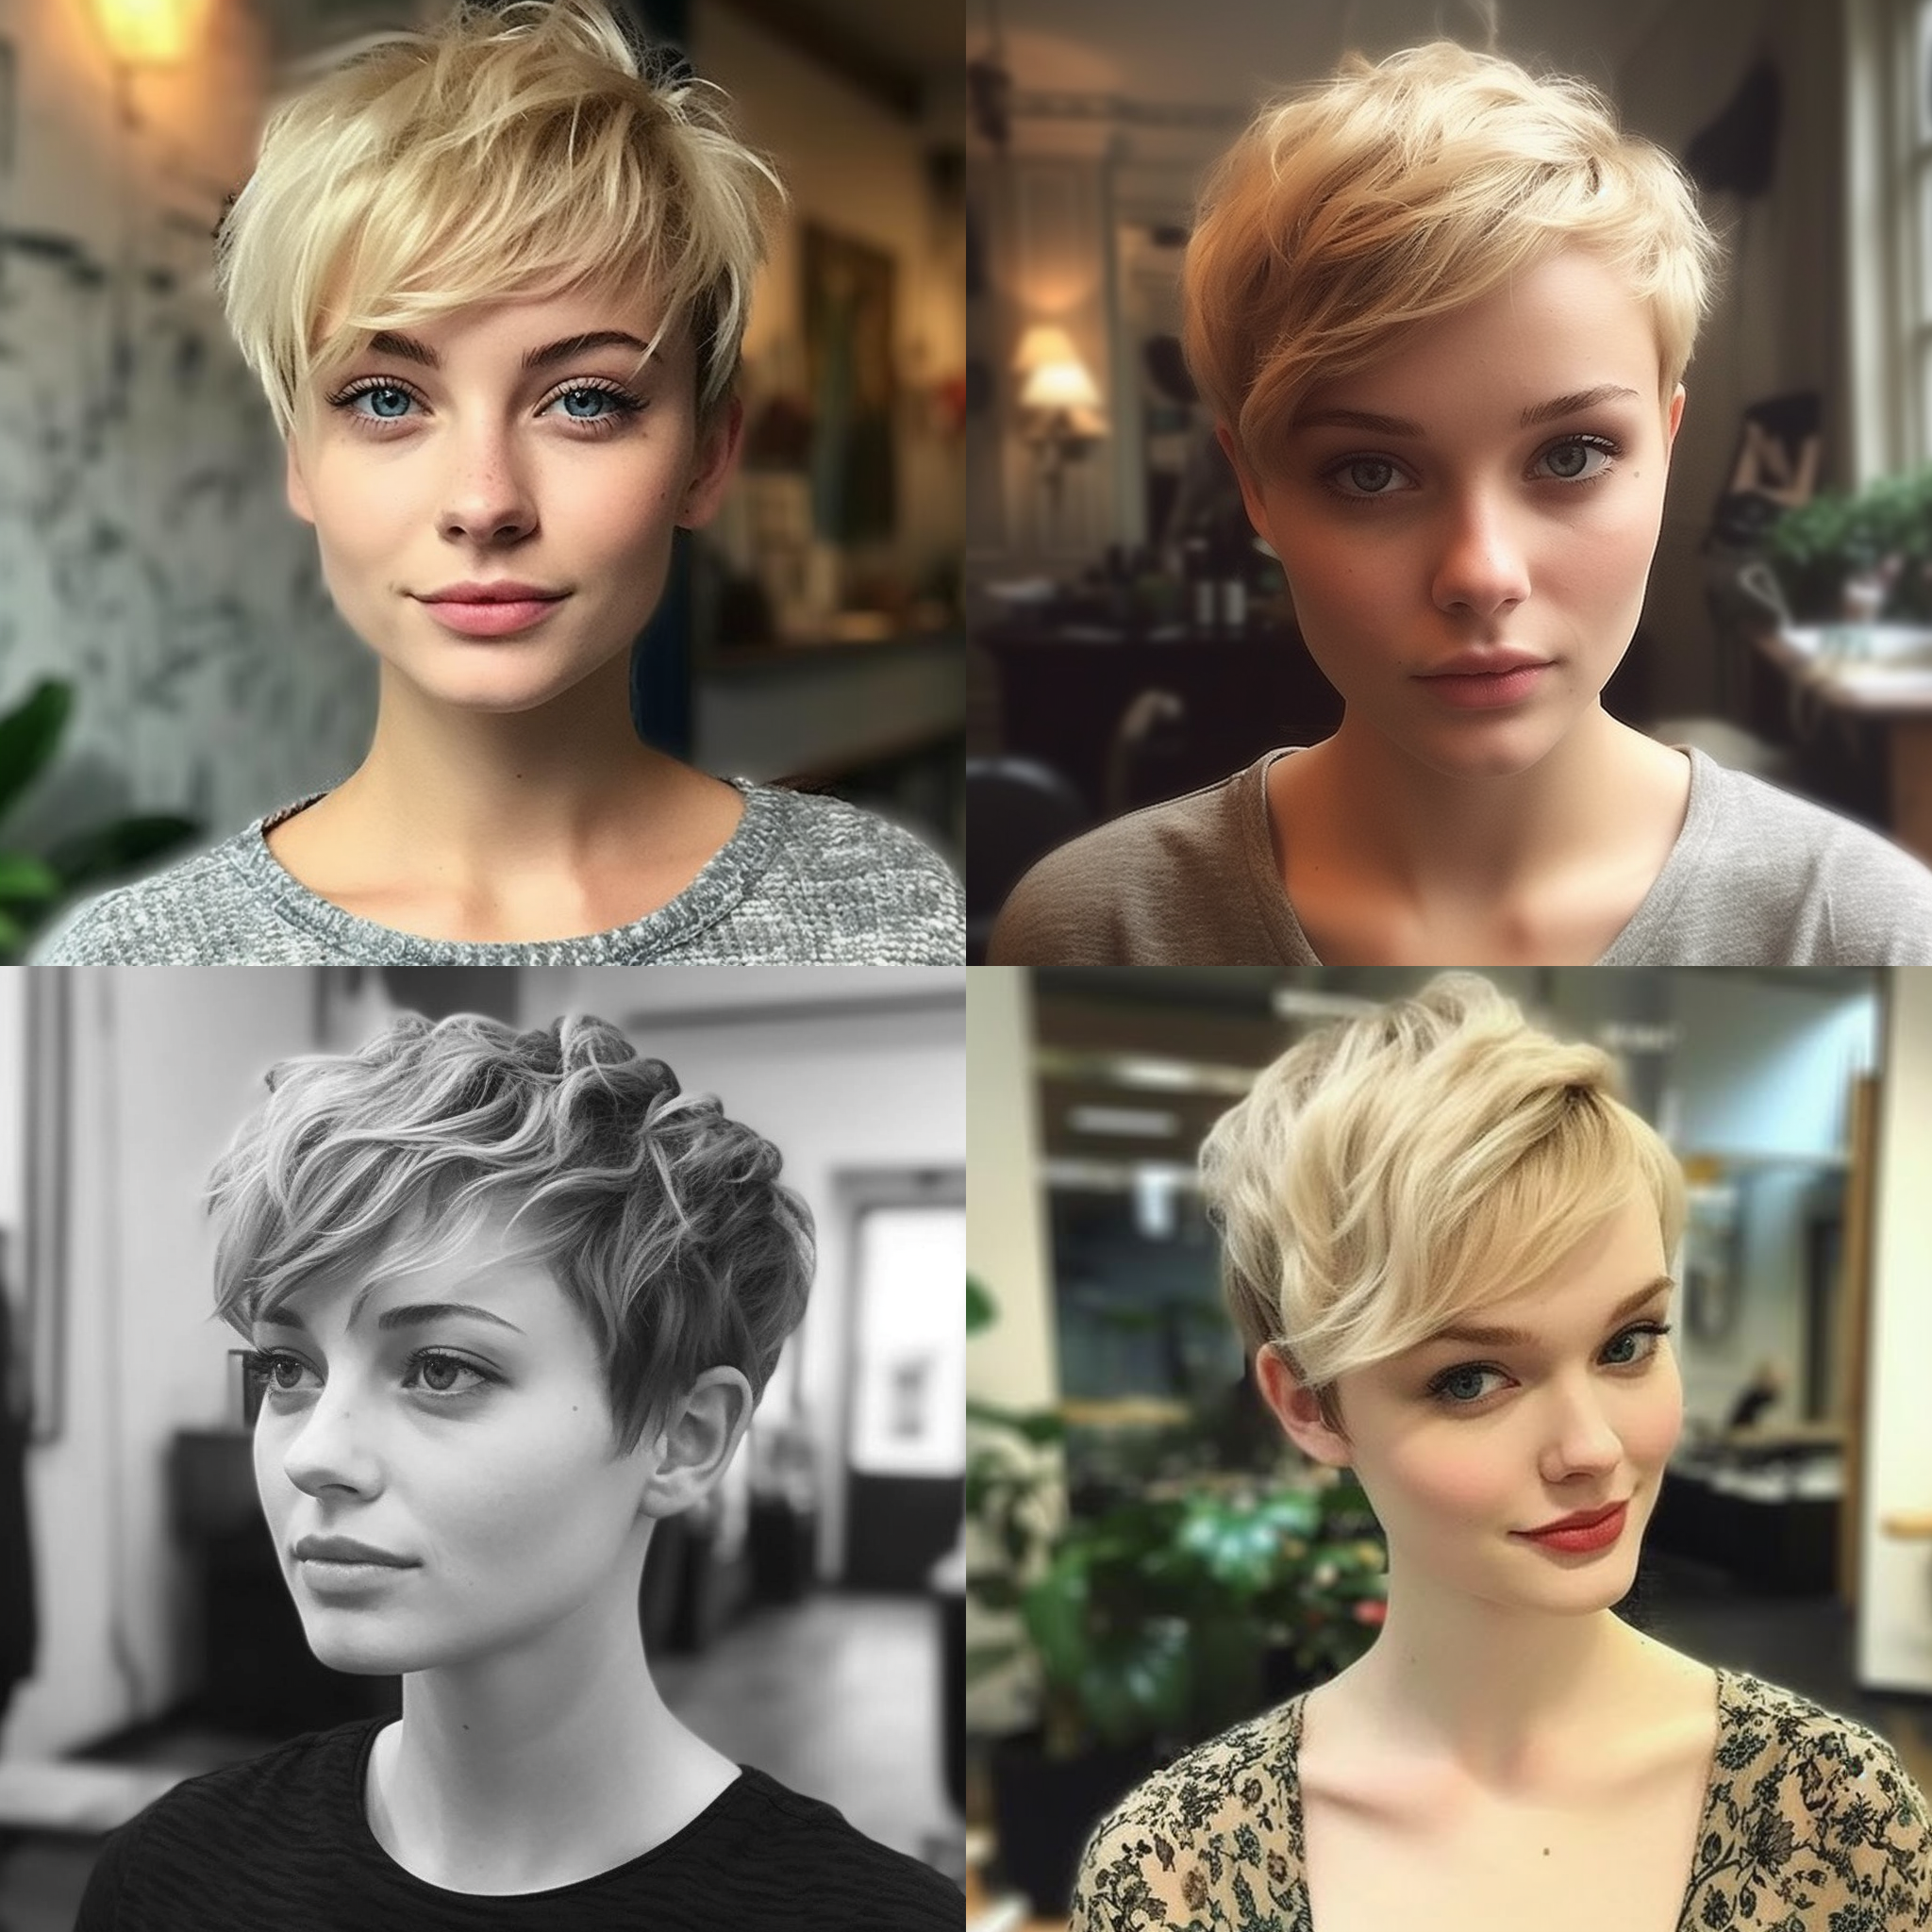 meowithai Pixie Haircut 1c44379c ad6c 4764 beee 3390e4bb16af